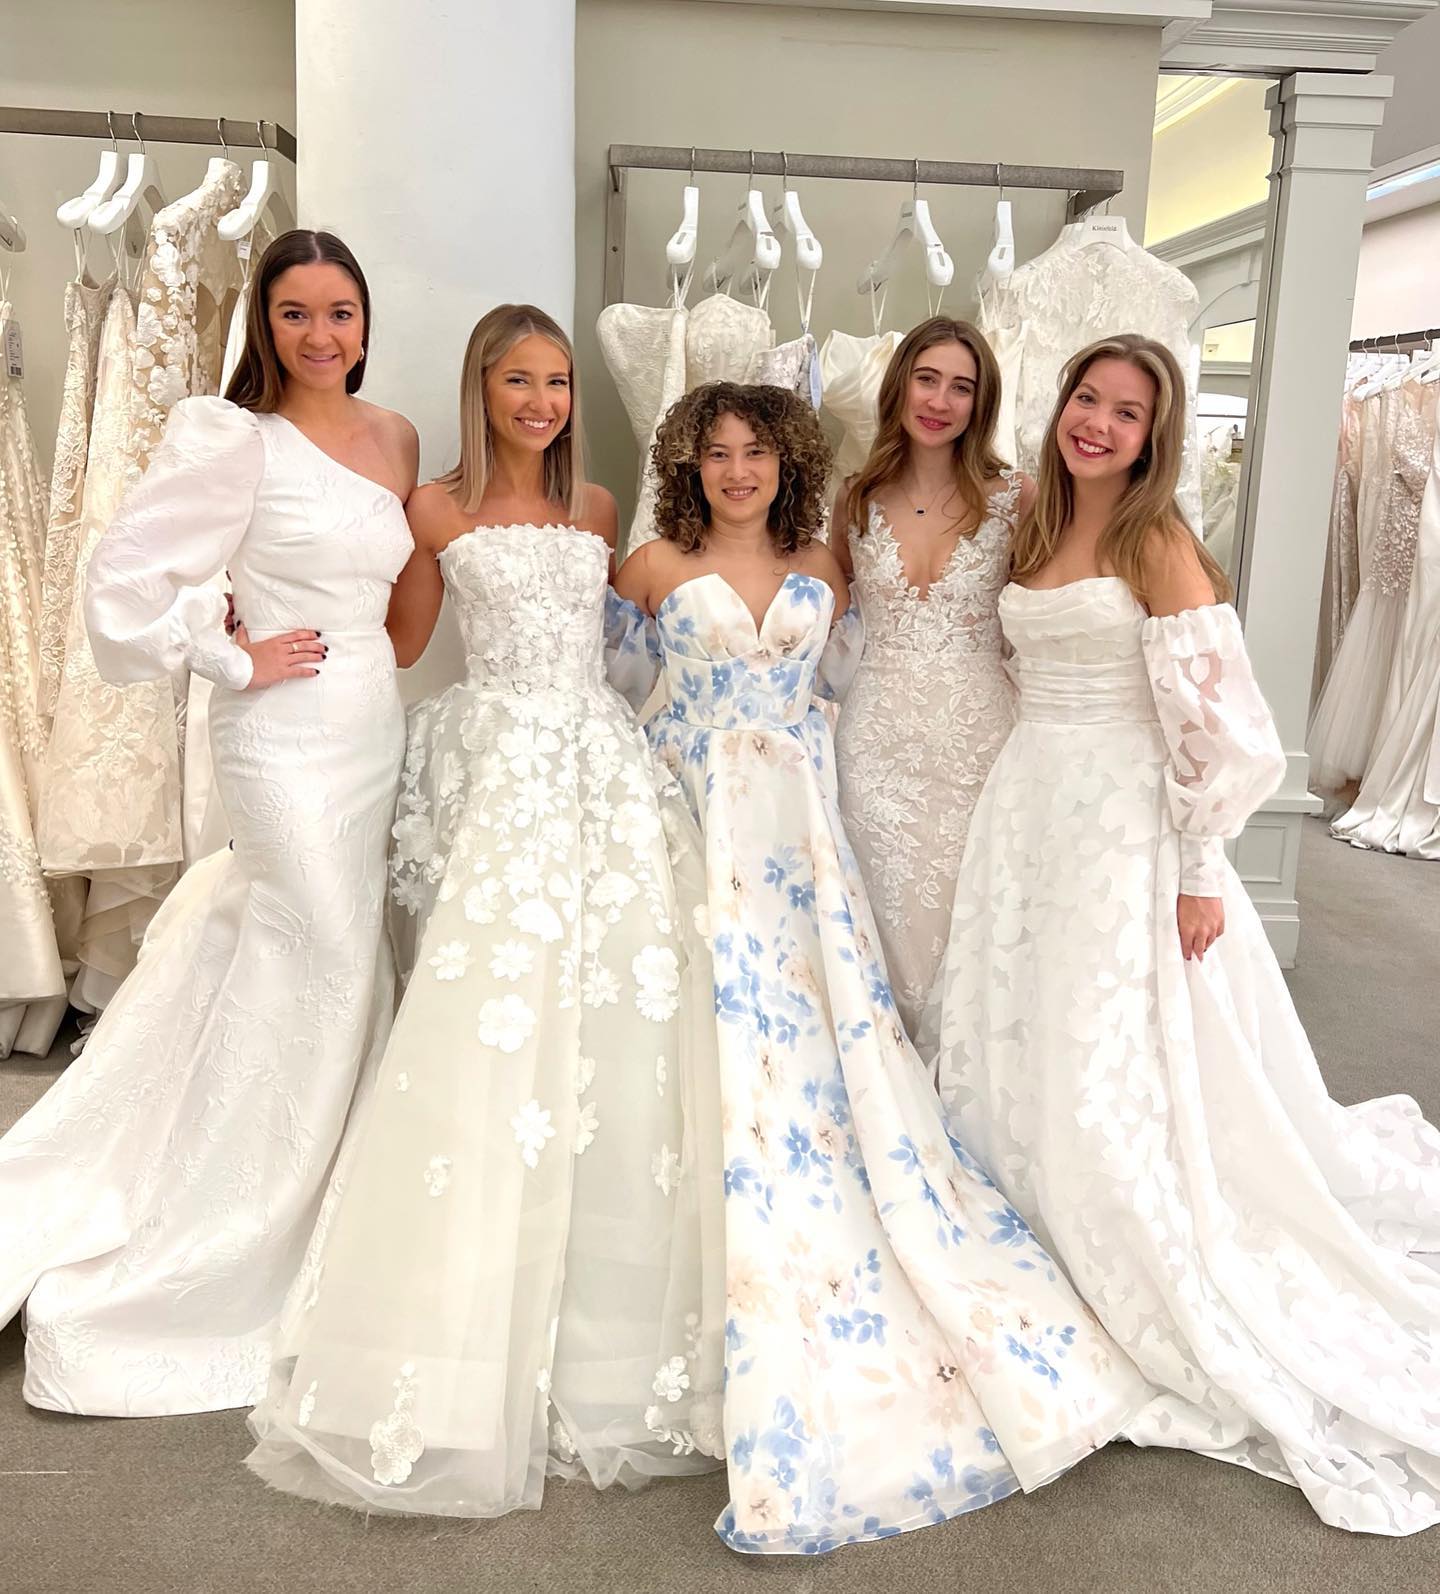 Kleinfeld Bridal in New York City sets world record